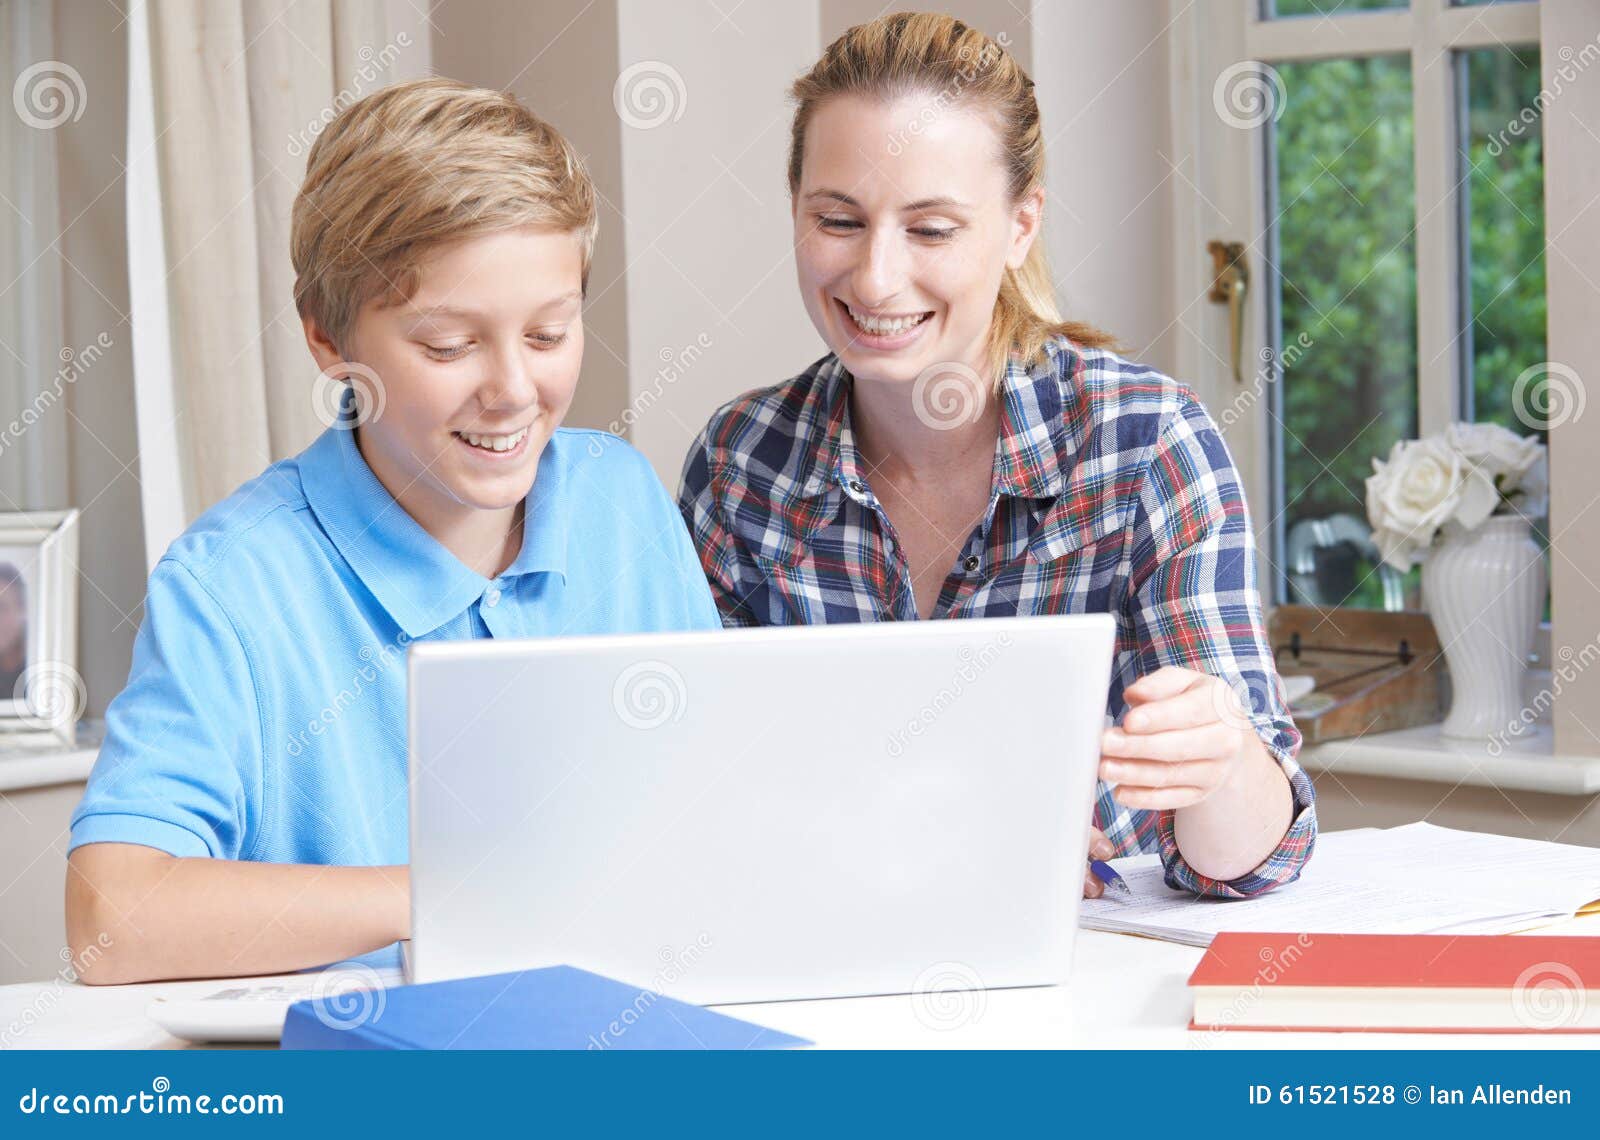 female home tutor helping boy with studies using laptop computer